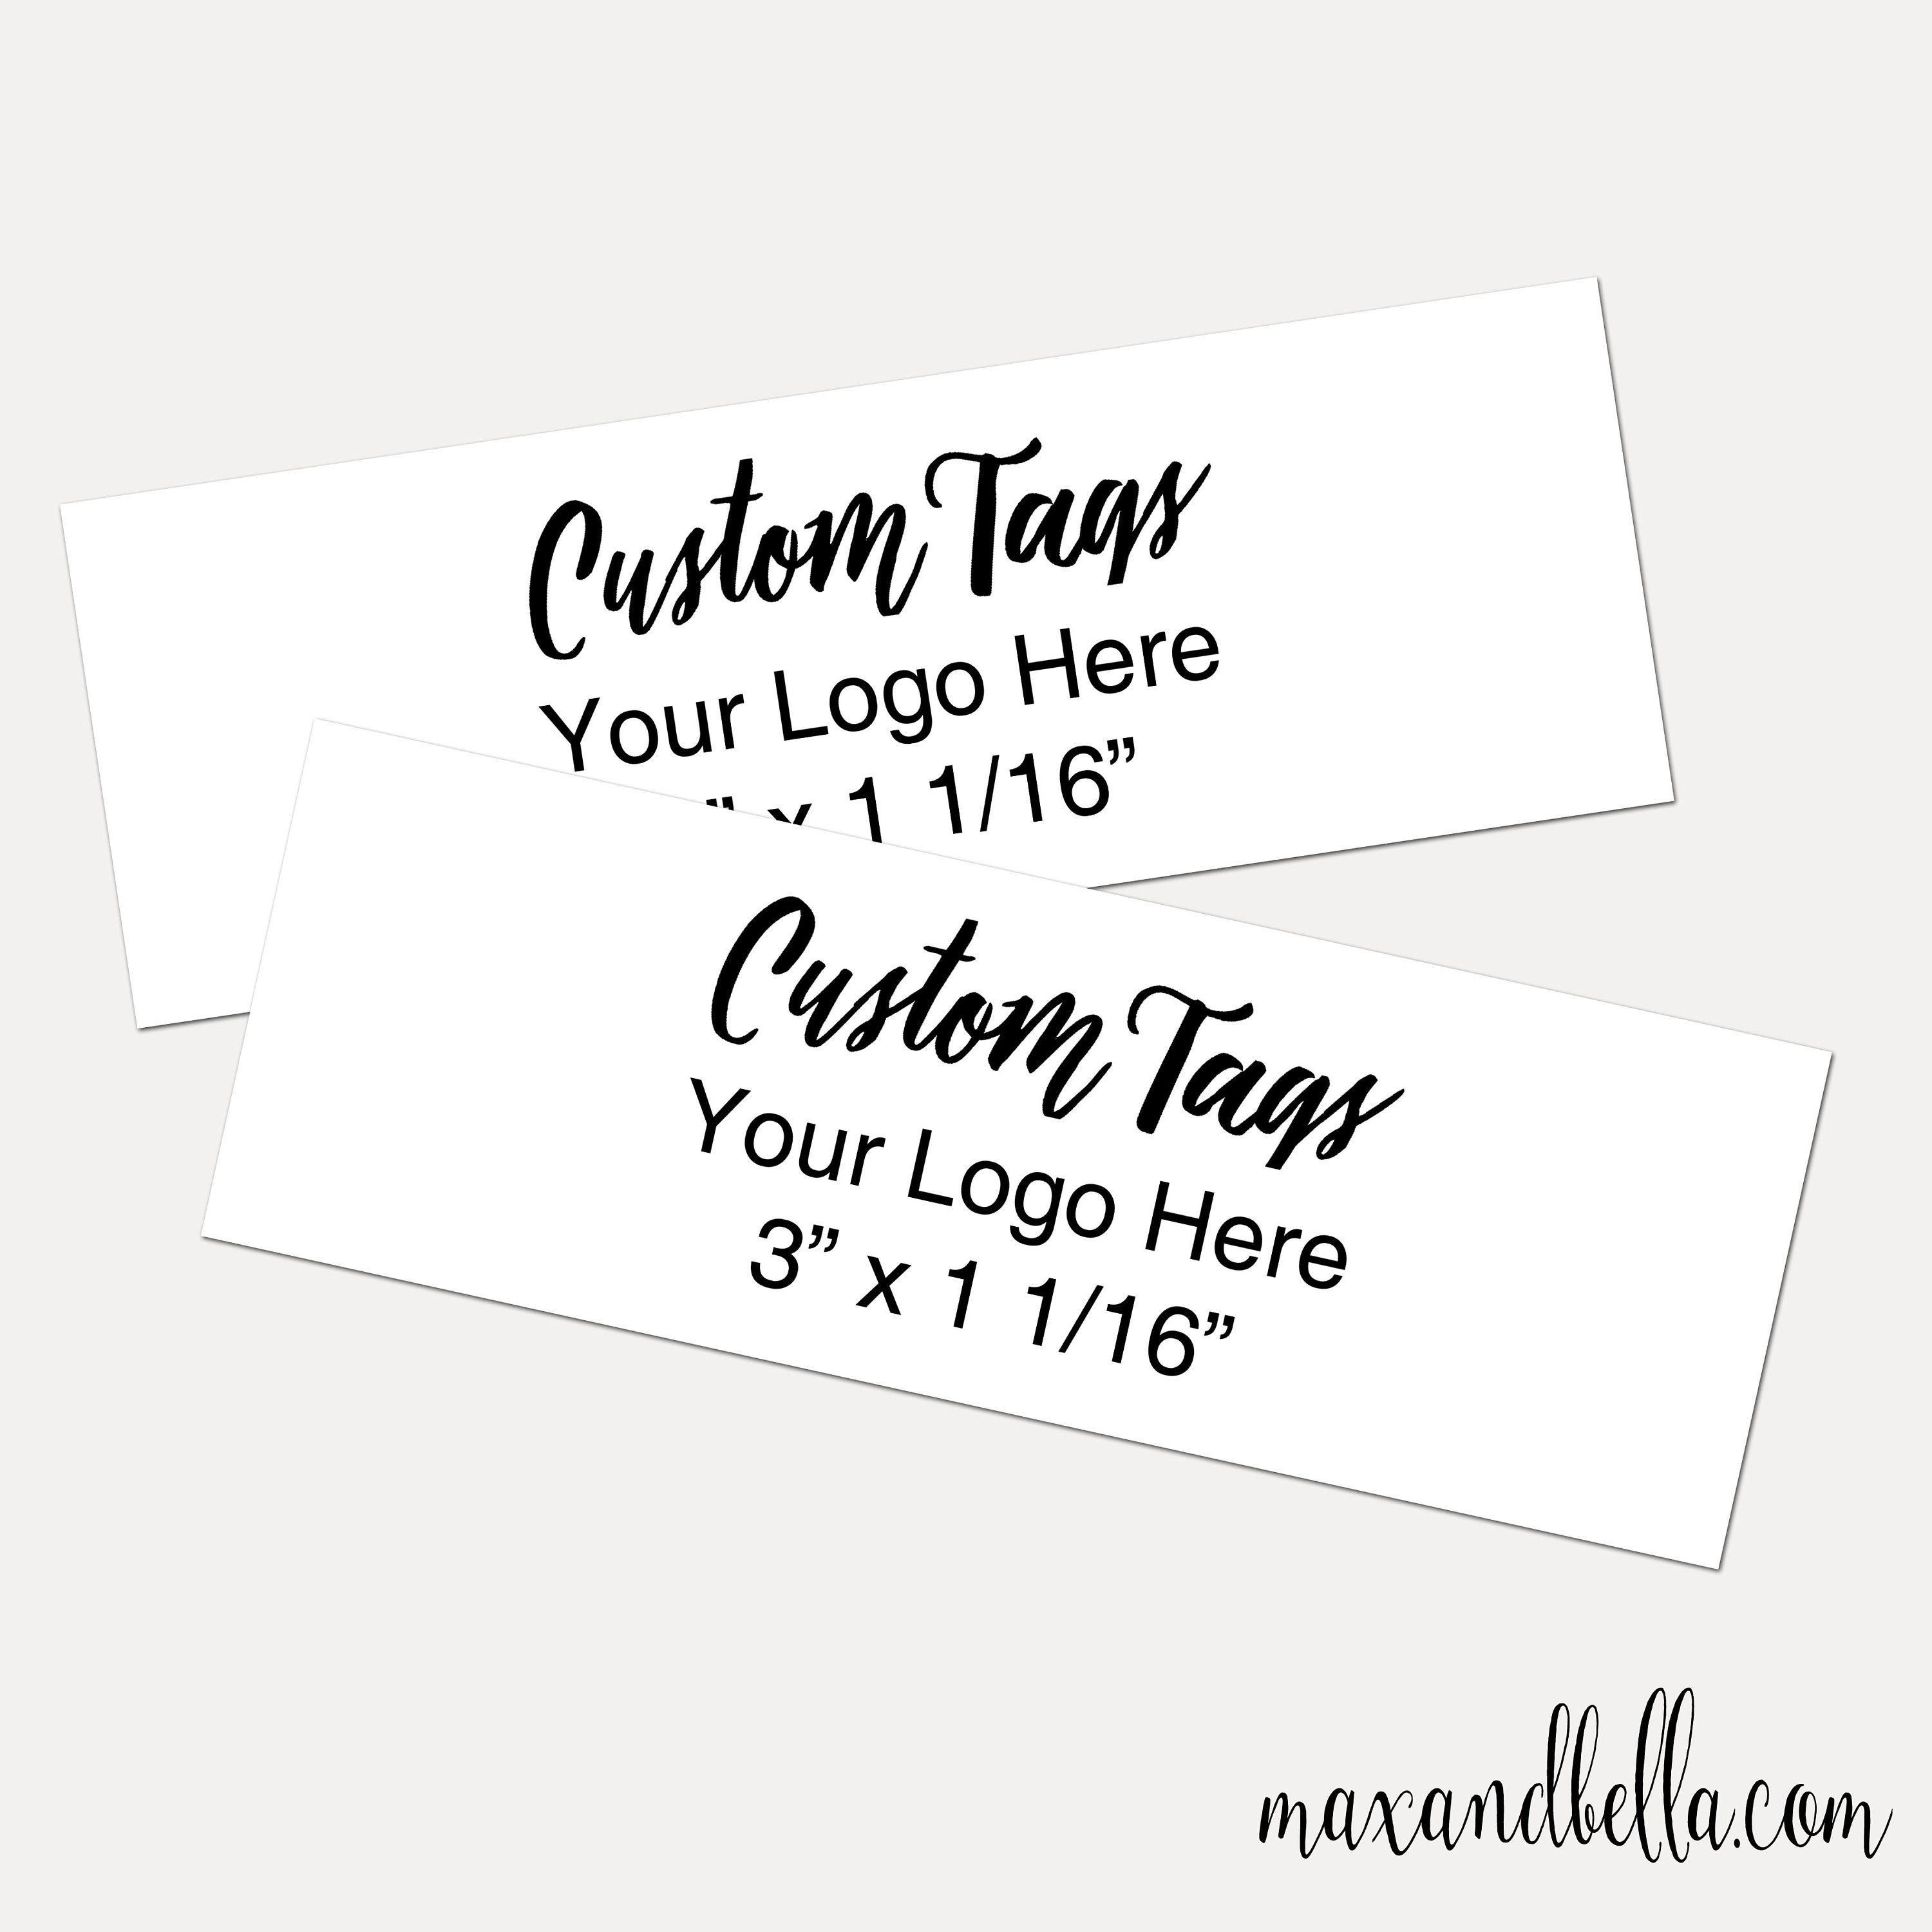 Merchandise Tags with Logo - Custom Kraft tags, Personalized Tags, Price Tags, Product Tags